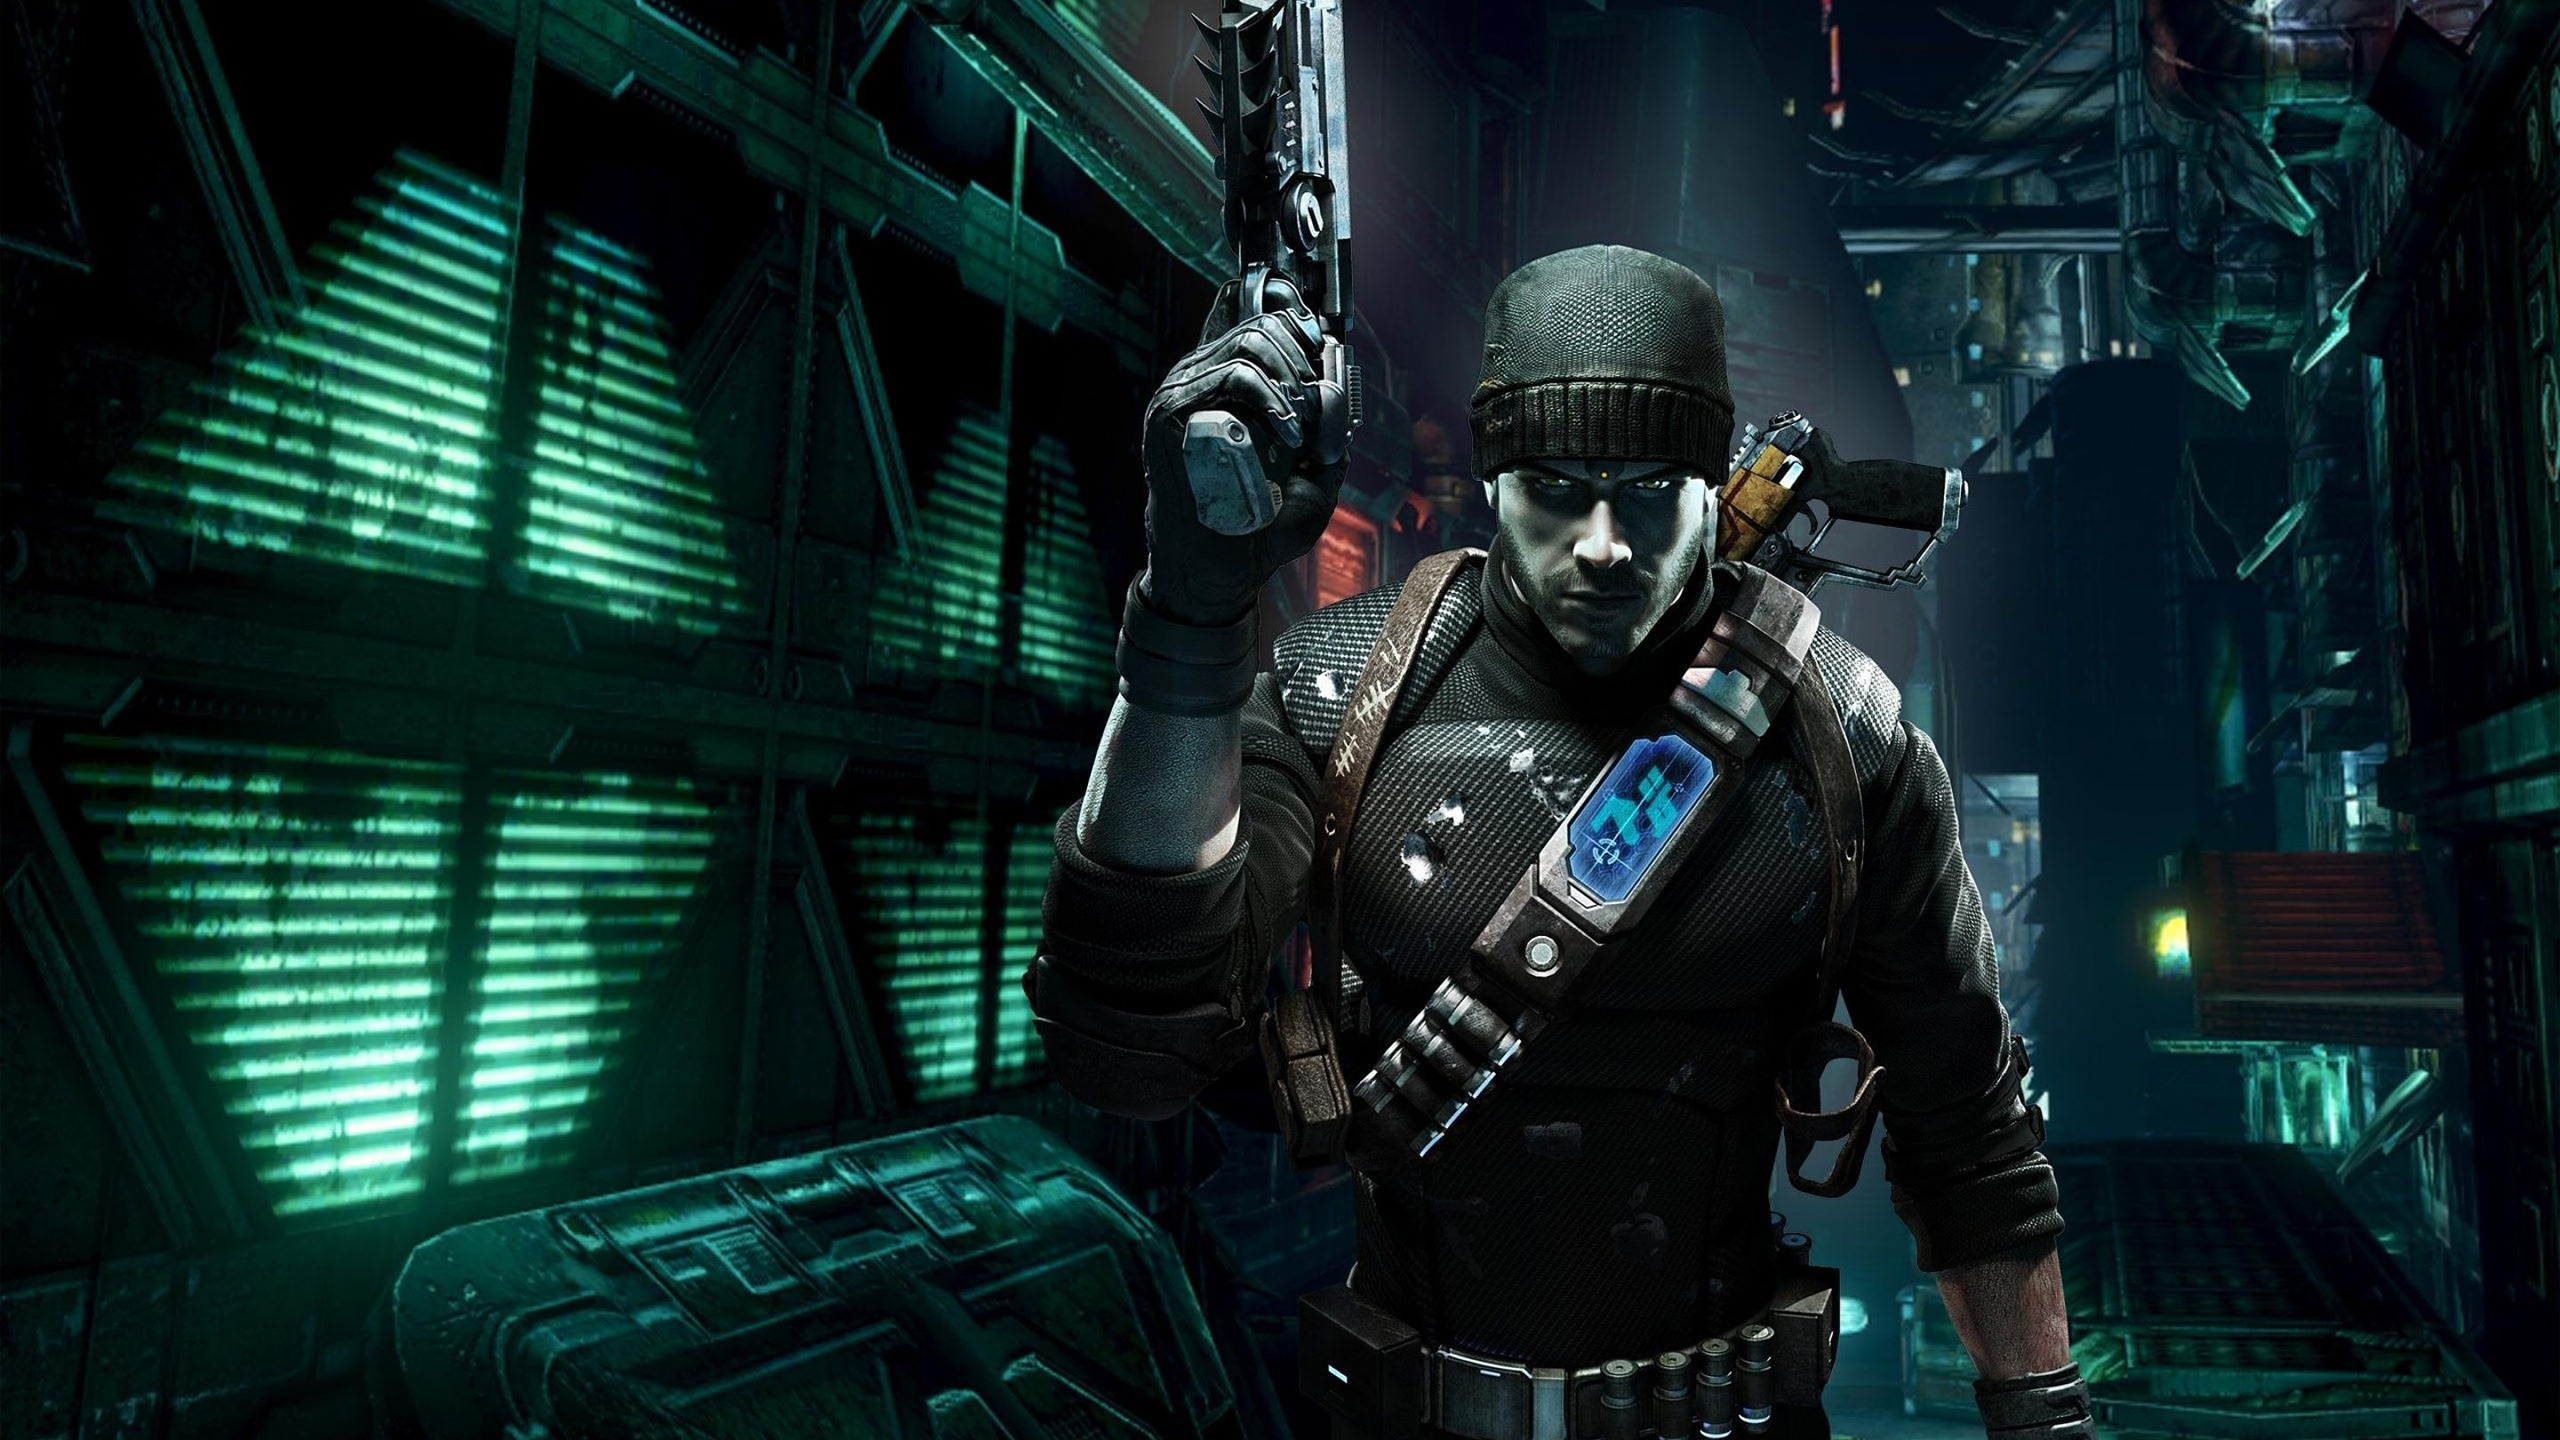 Prey 2 Video Game for 2560x1440 HDTV resolution